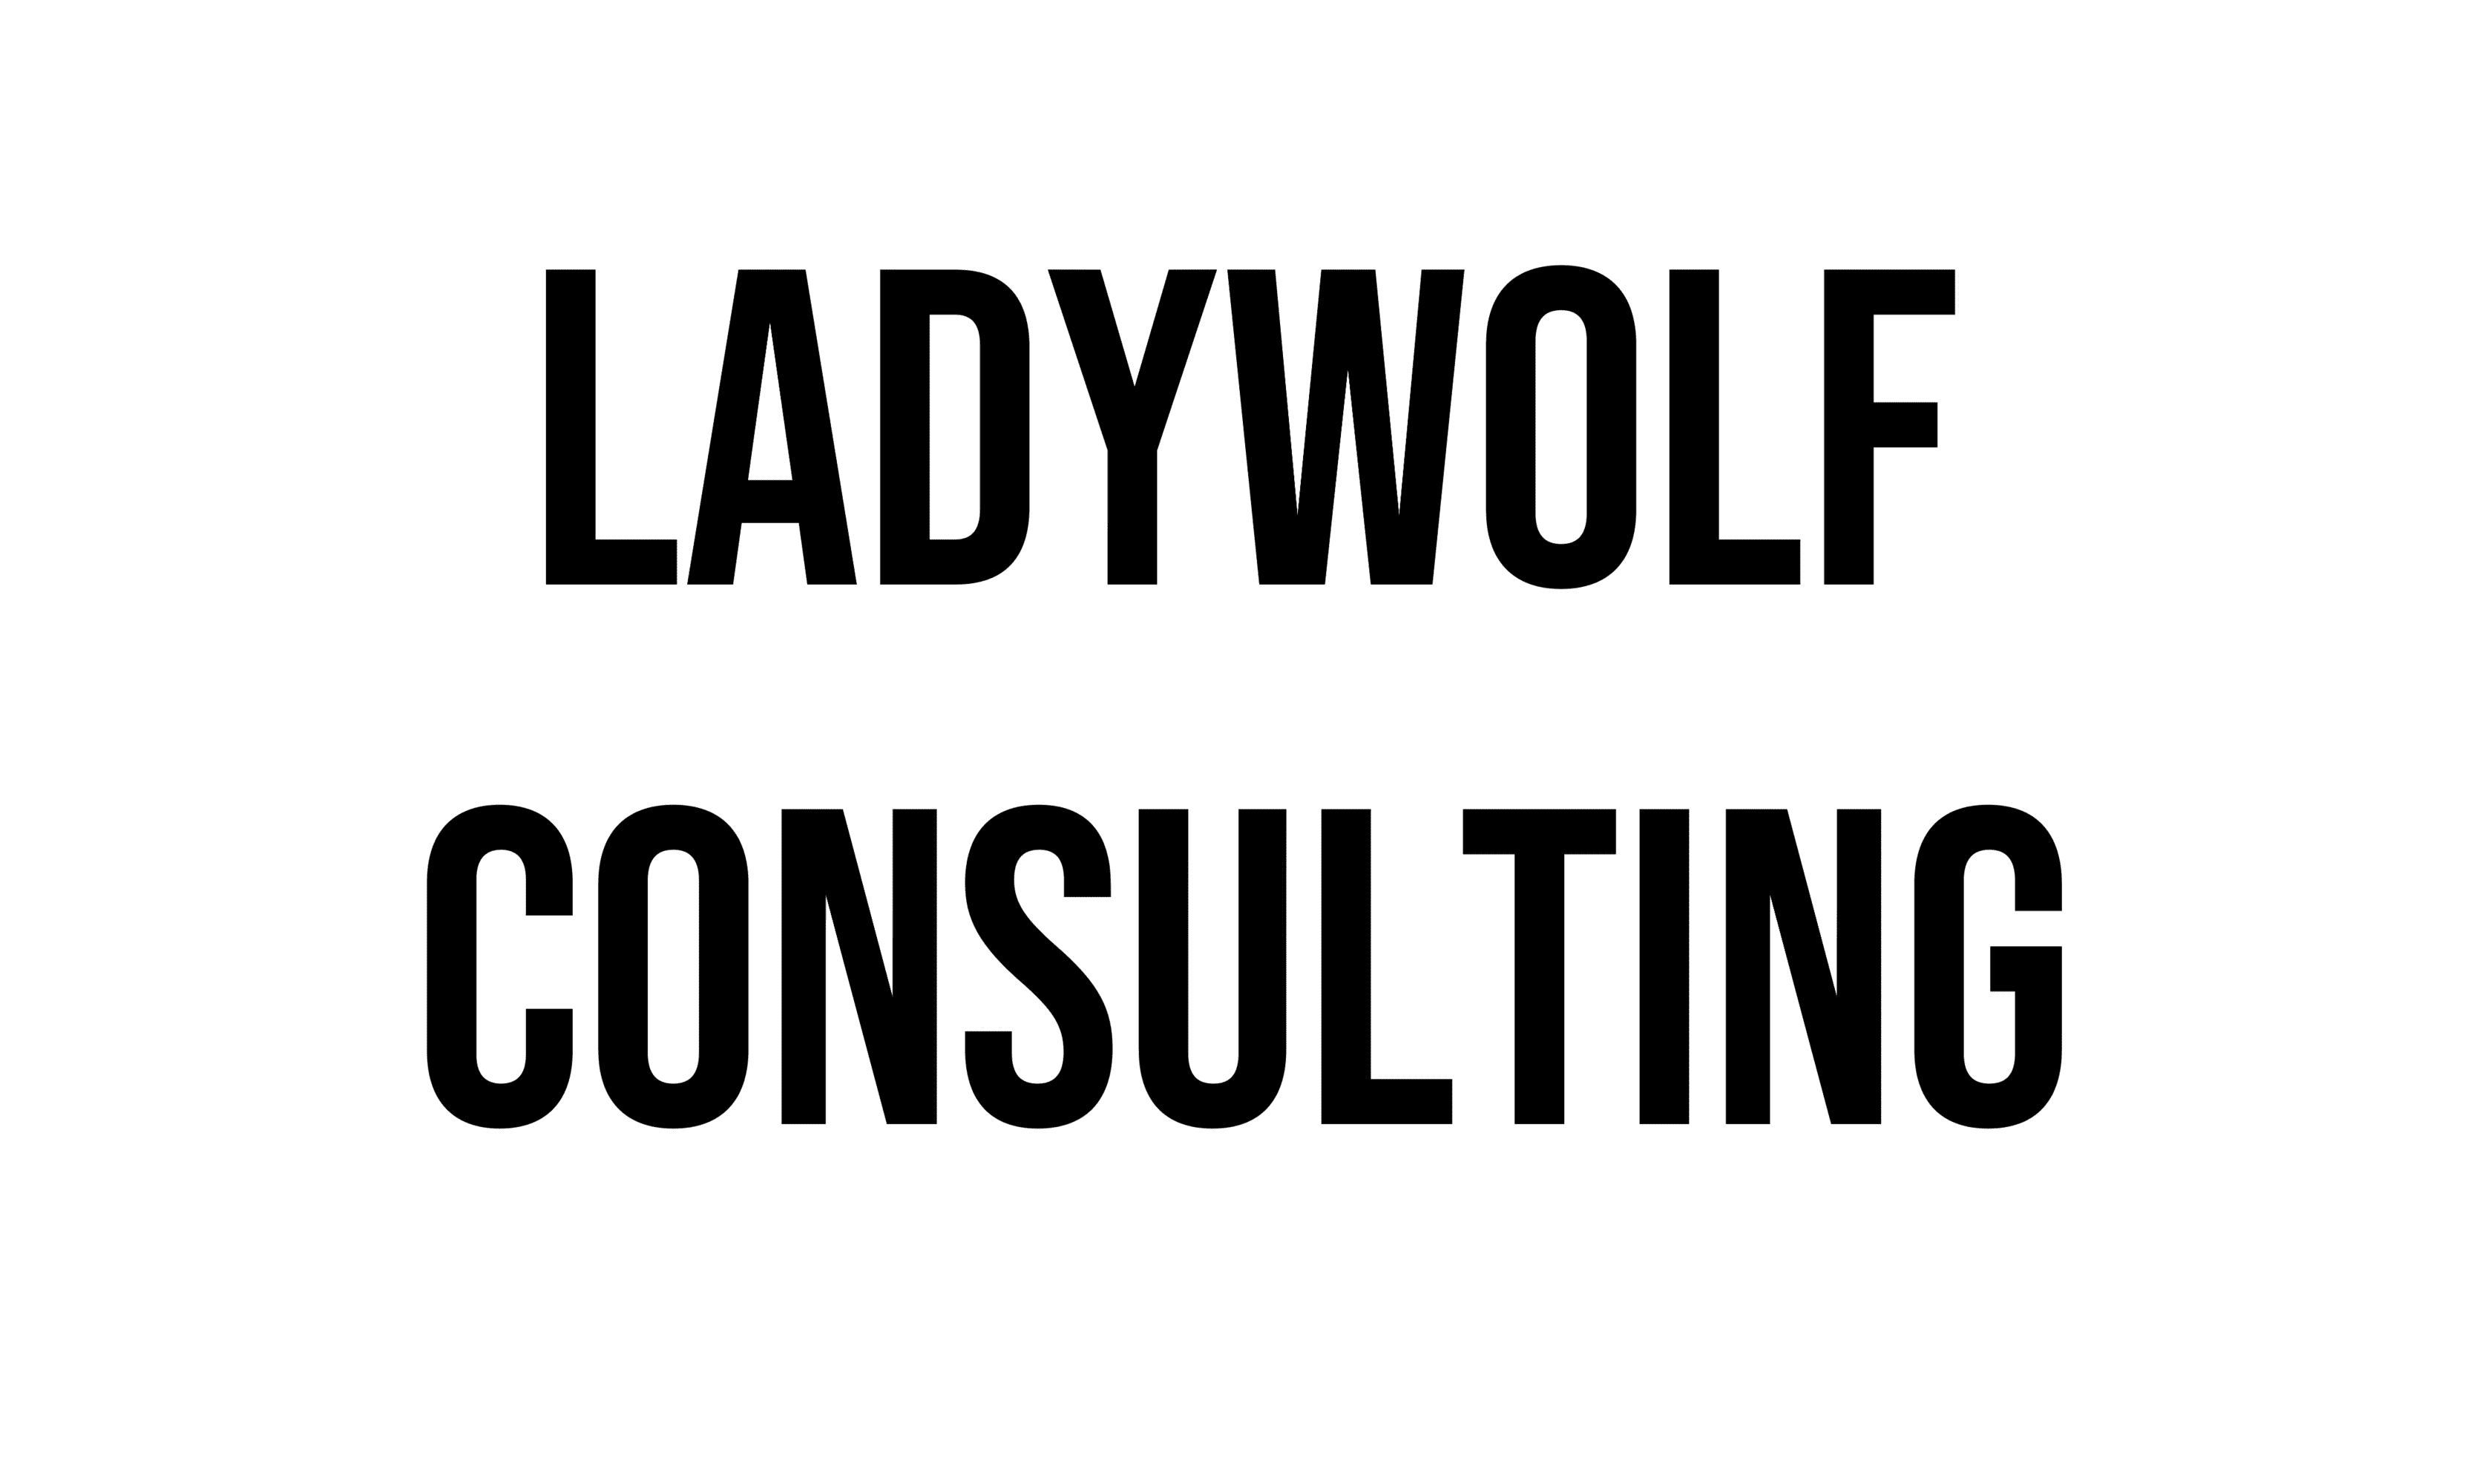 Ladywolf Consulting